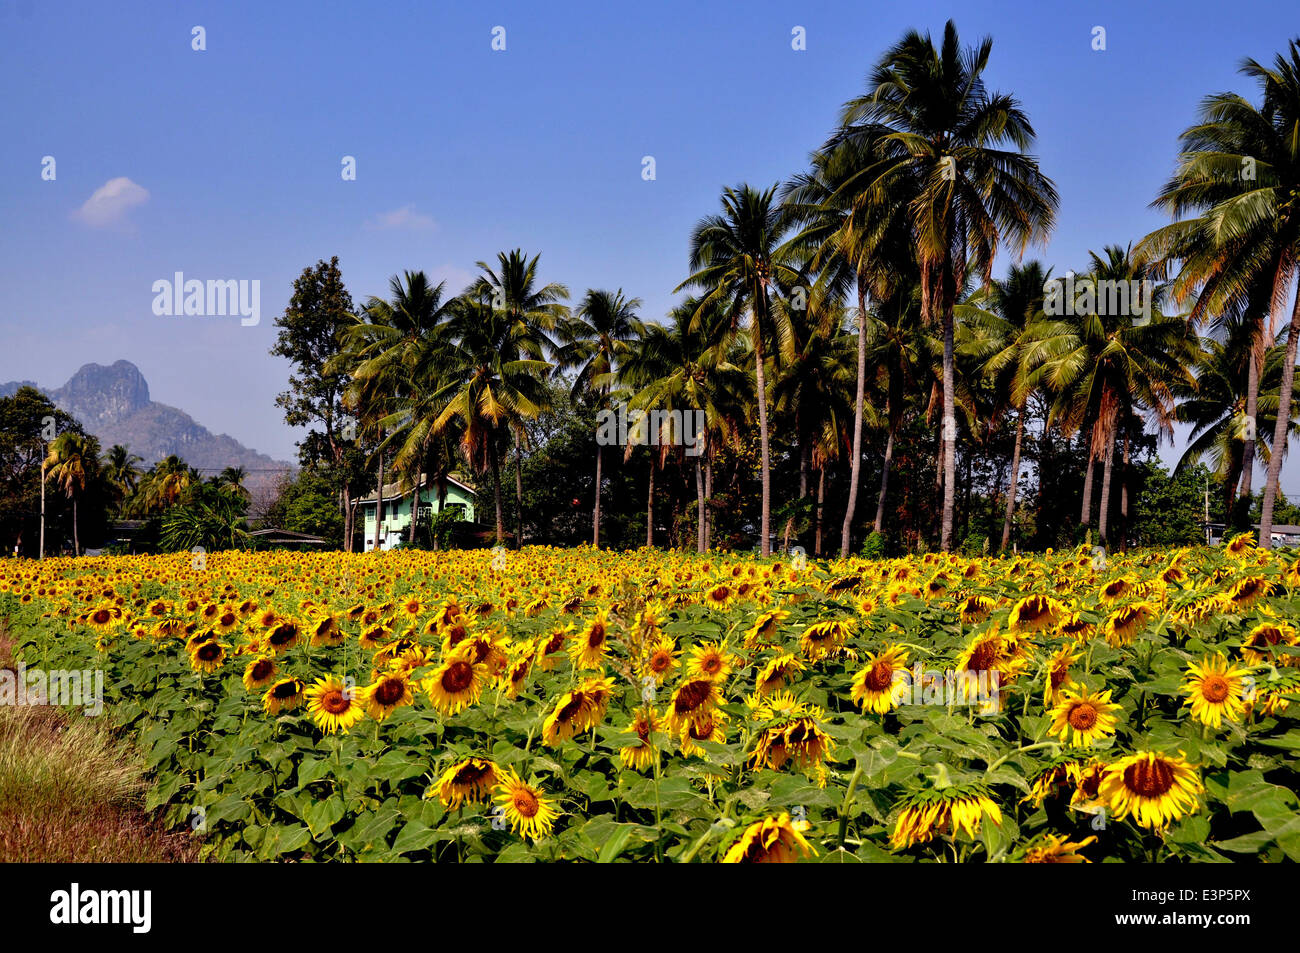 Lop Buri, Thailand: Field of bright yellow Sunflowers growing amidst a grove of tropical palm trees Stock Photo